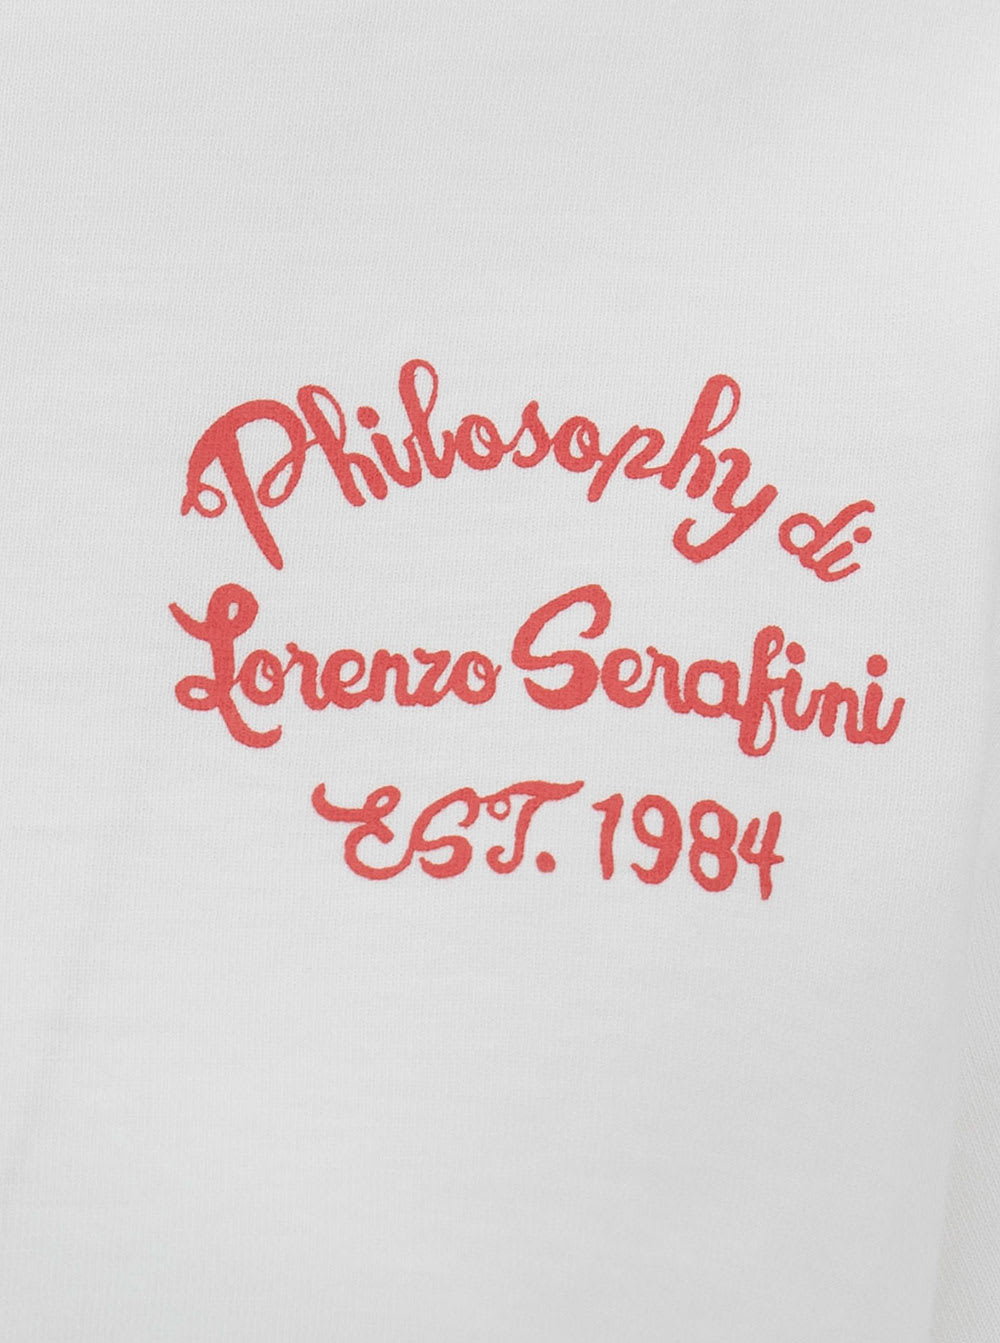 Shop Philosophy Di Lorenzo Serafini White Crop T-shirt With Front And Rear Logo Print In Cotton Woman